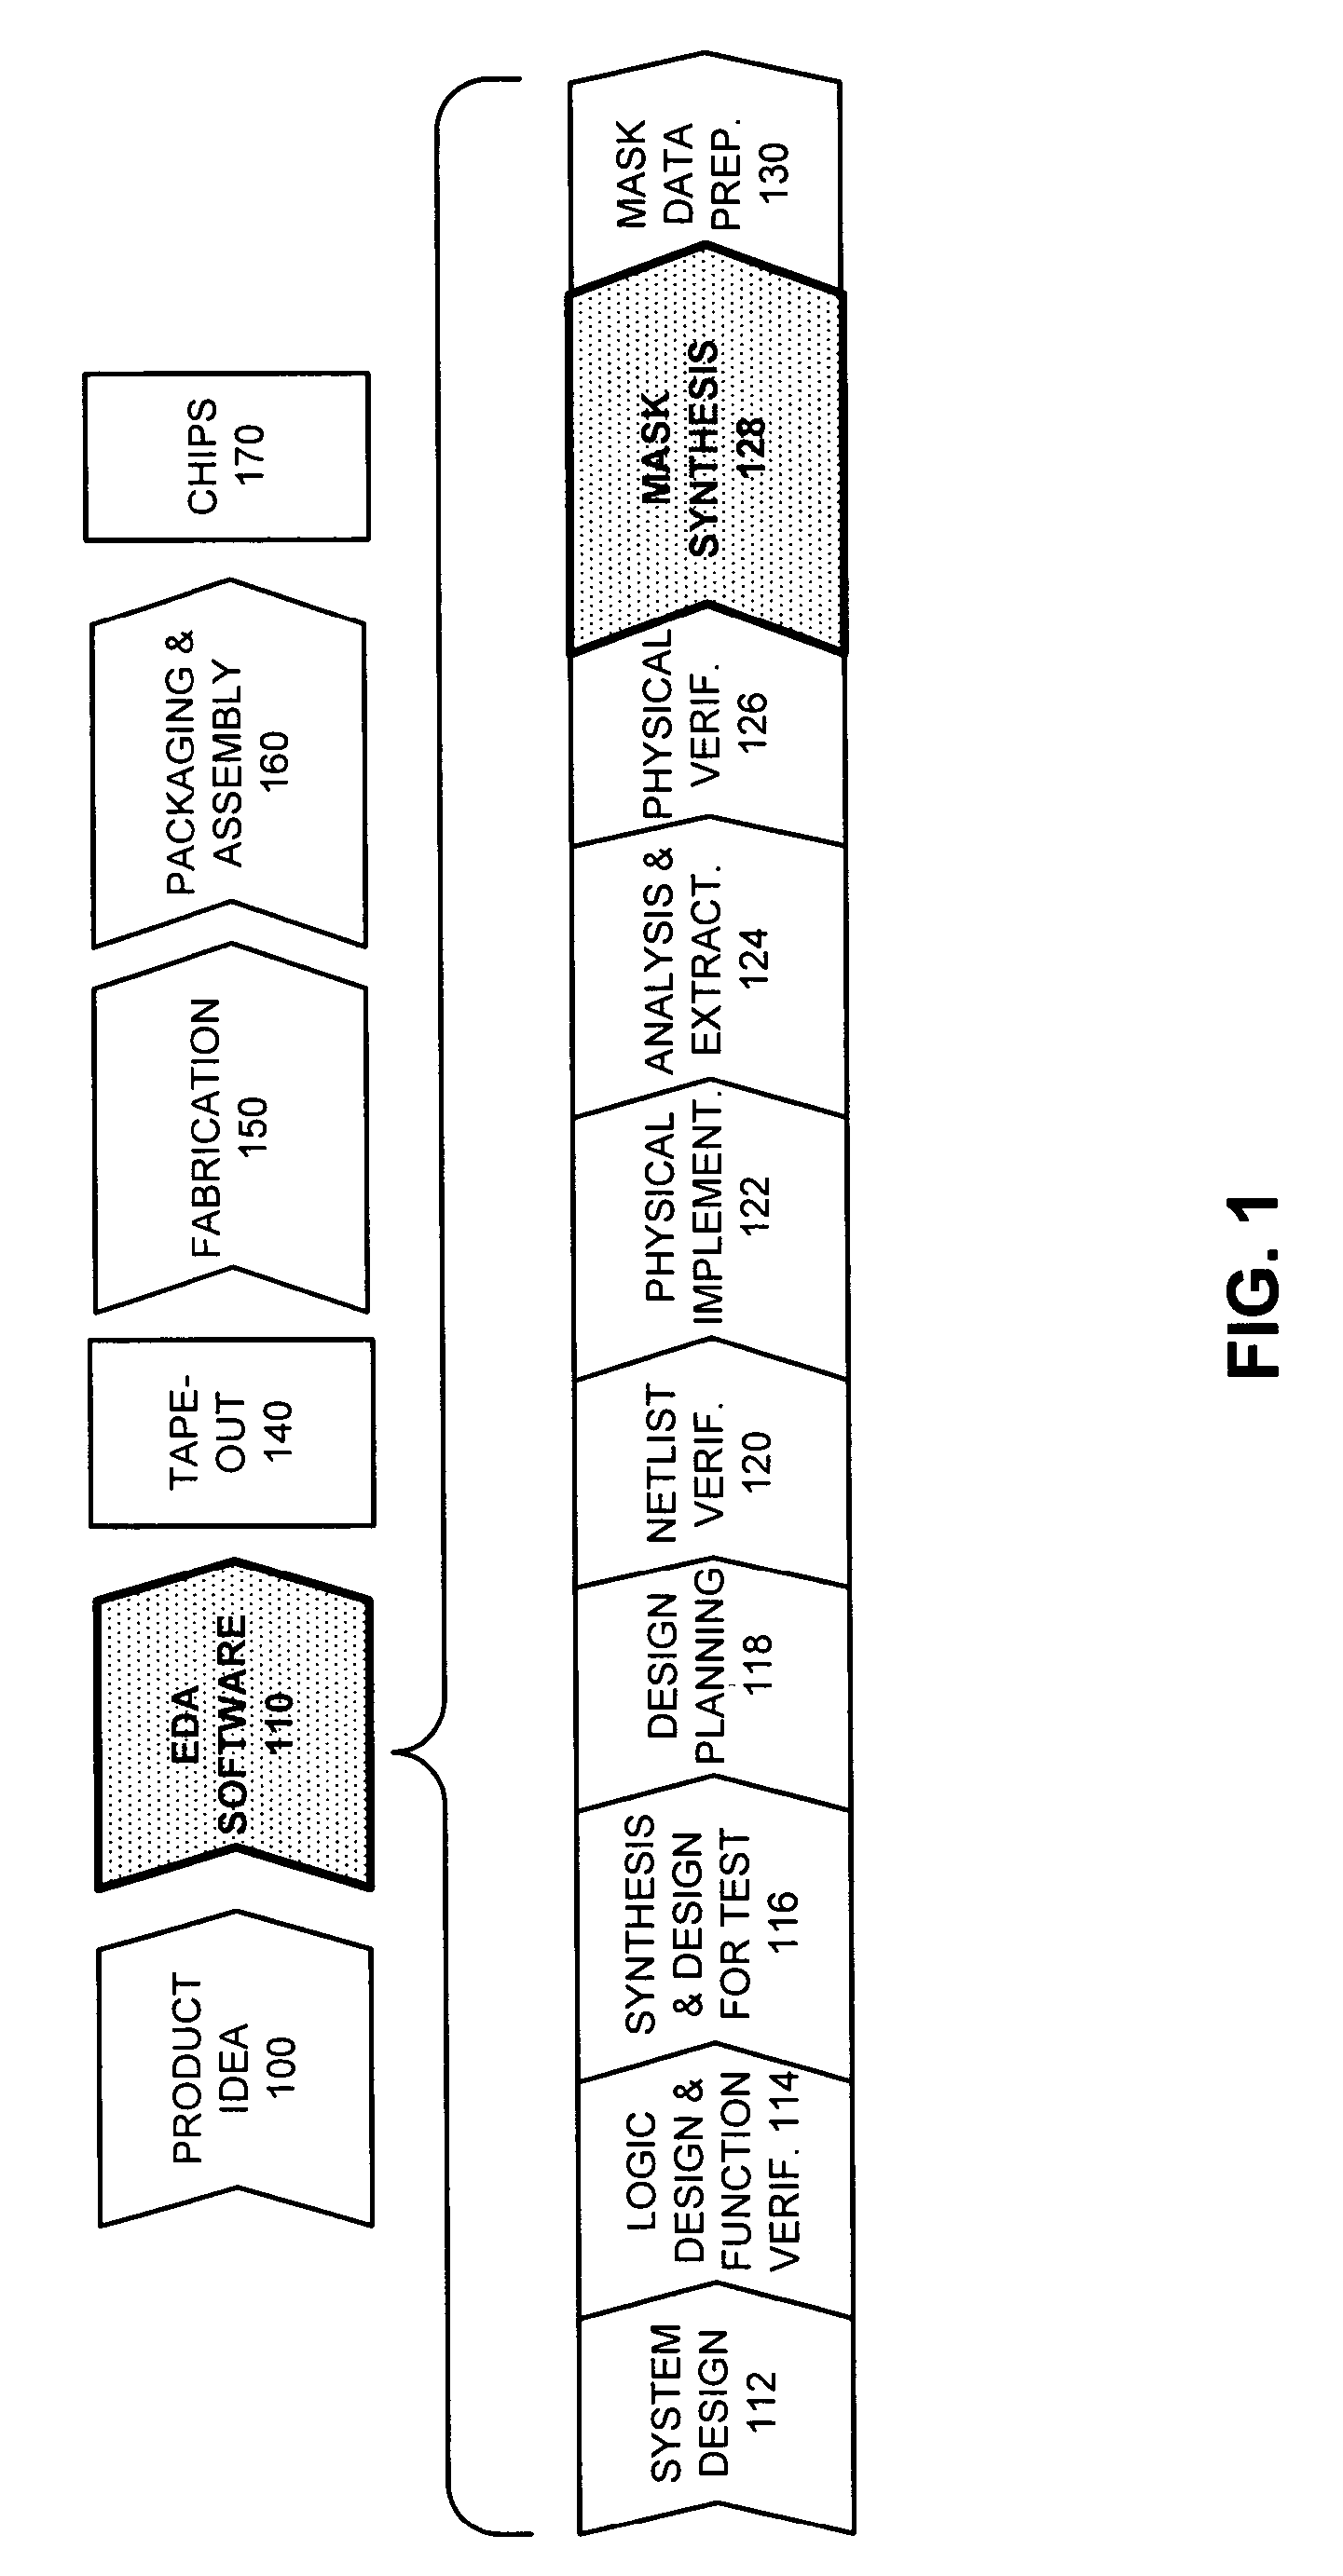 Method and apparatus for identifying and correcting phase conflicts